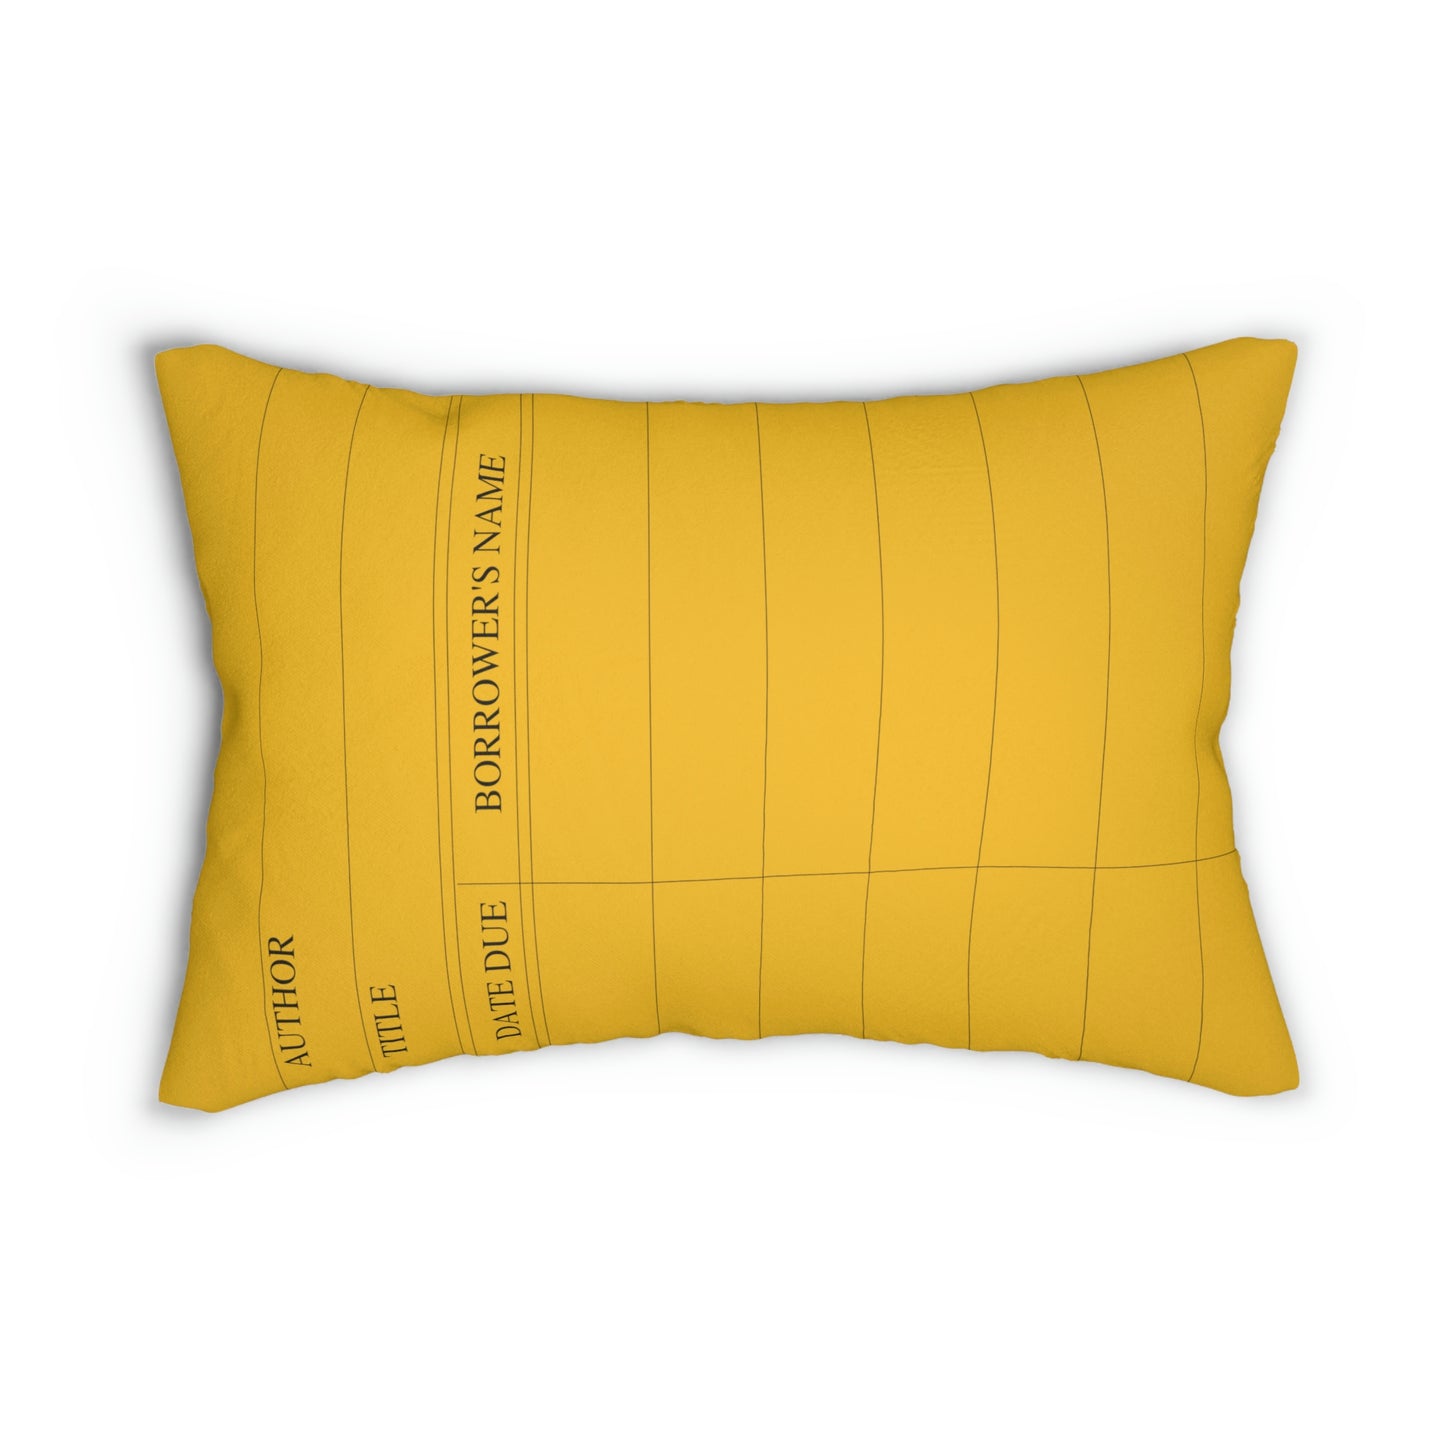 Library Card Pillows, Reading, Book Lover, Yellow